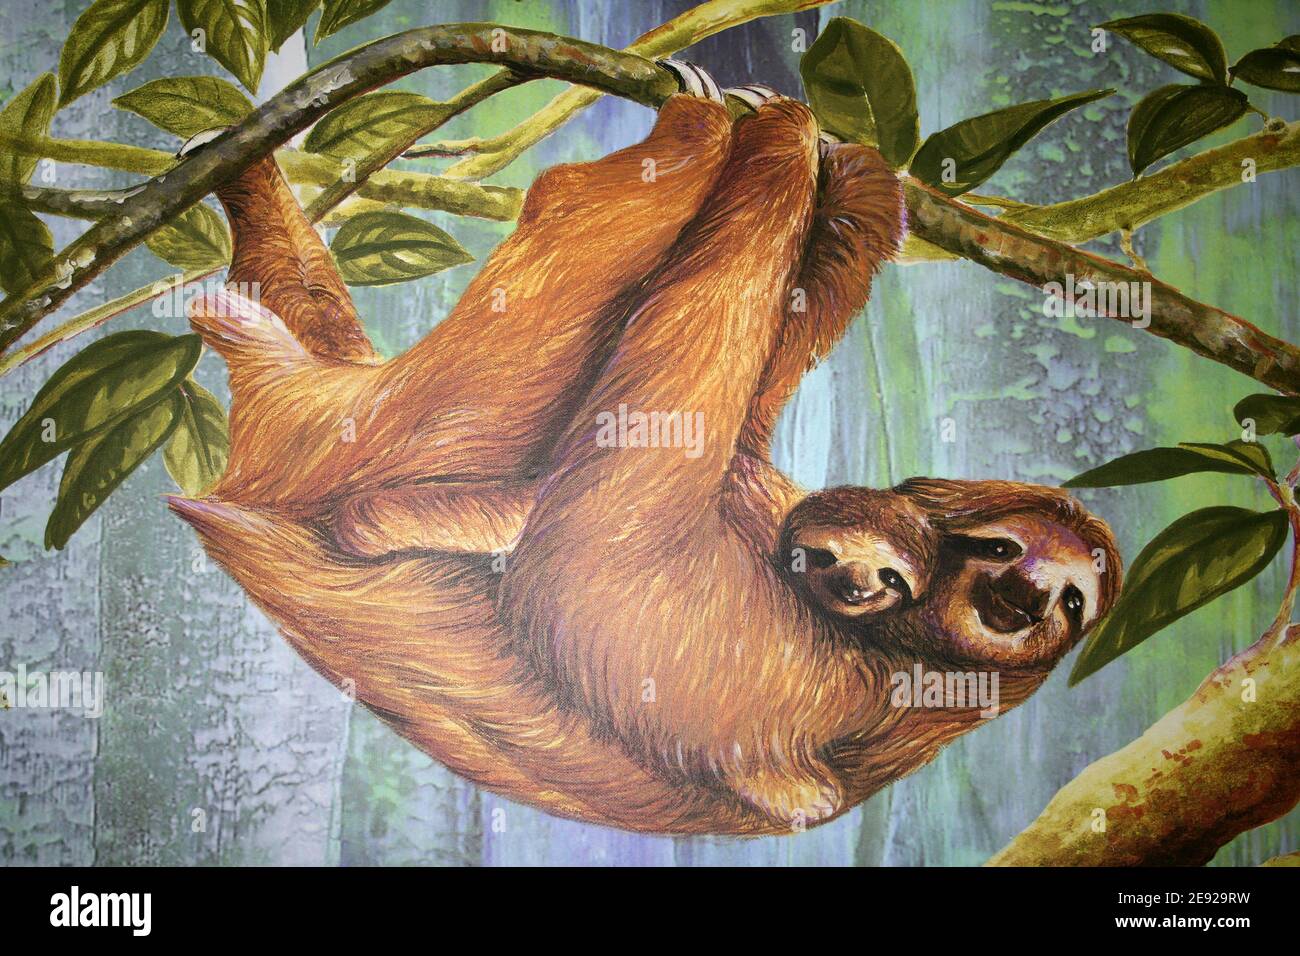 Painting Showing a Three-toed Sloth Mother and Baby Stock Photo